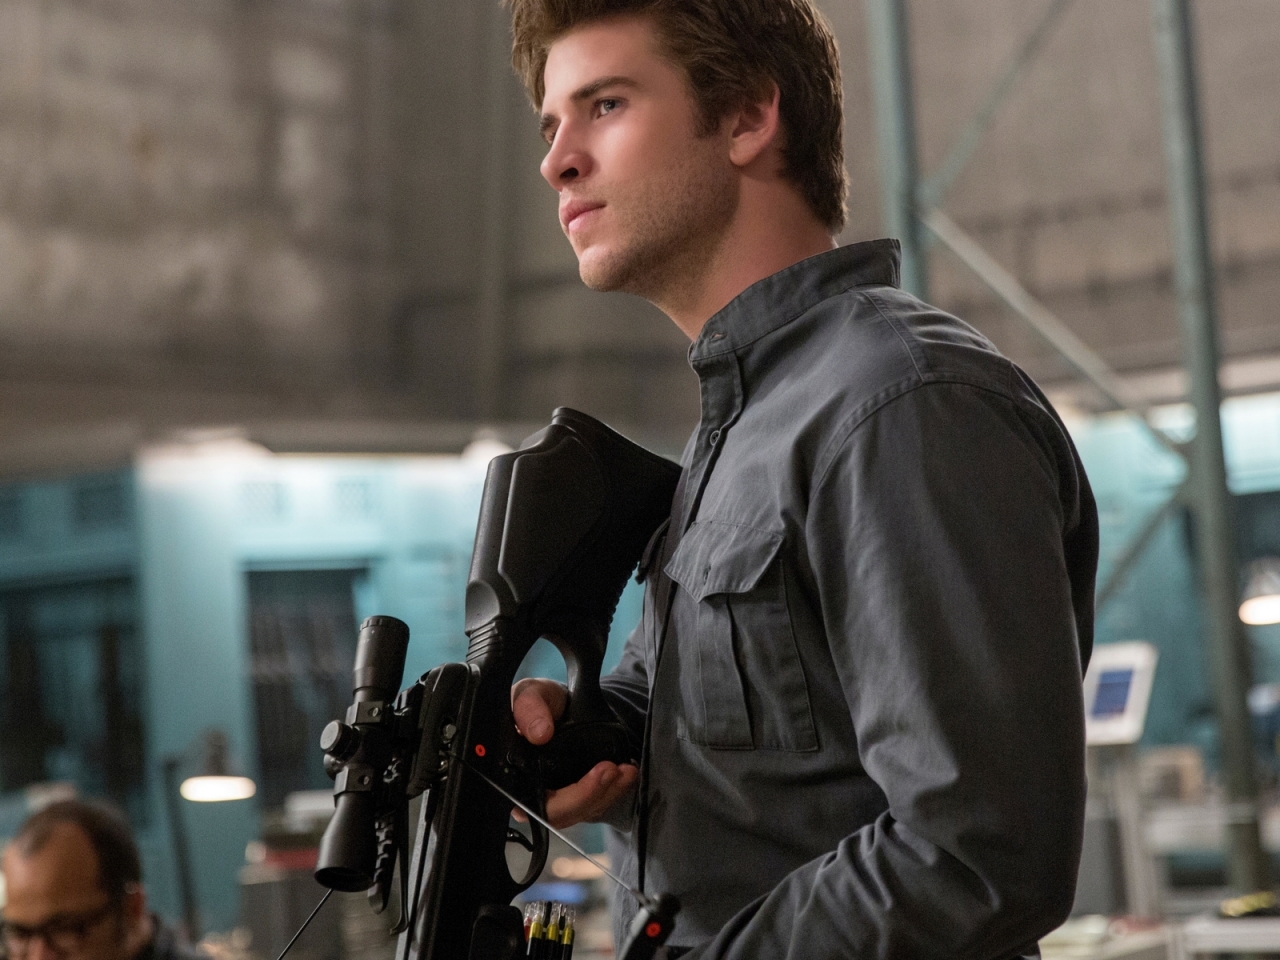 Liam Hemsworth in The Hunger Games for 1280 x 960 resolution